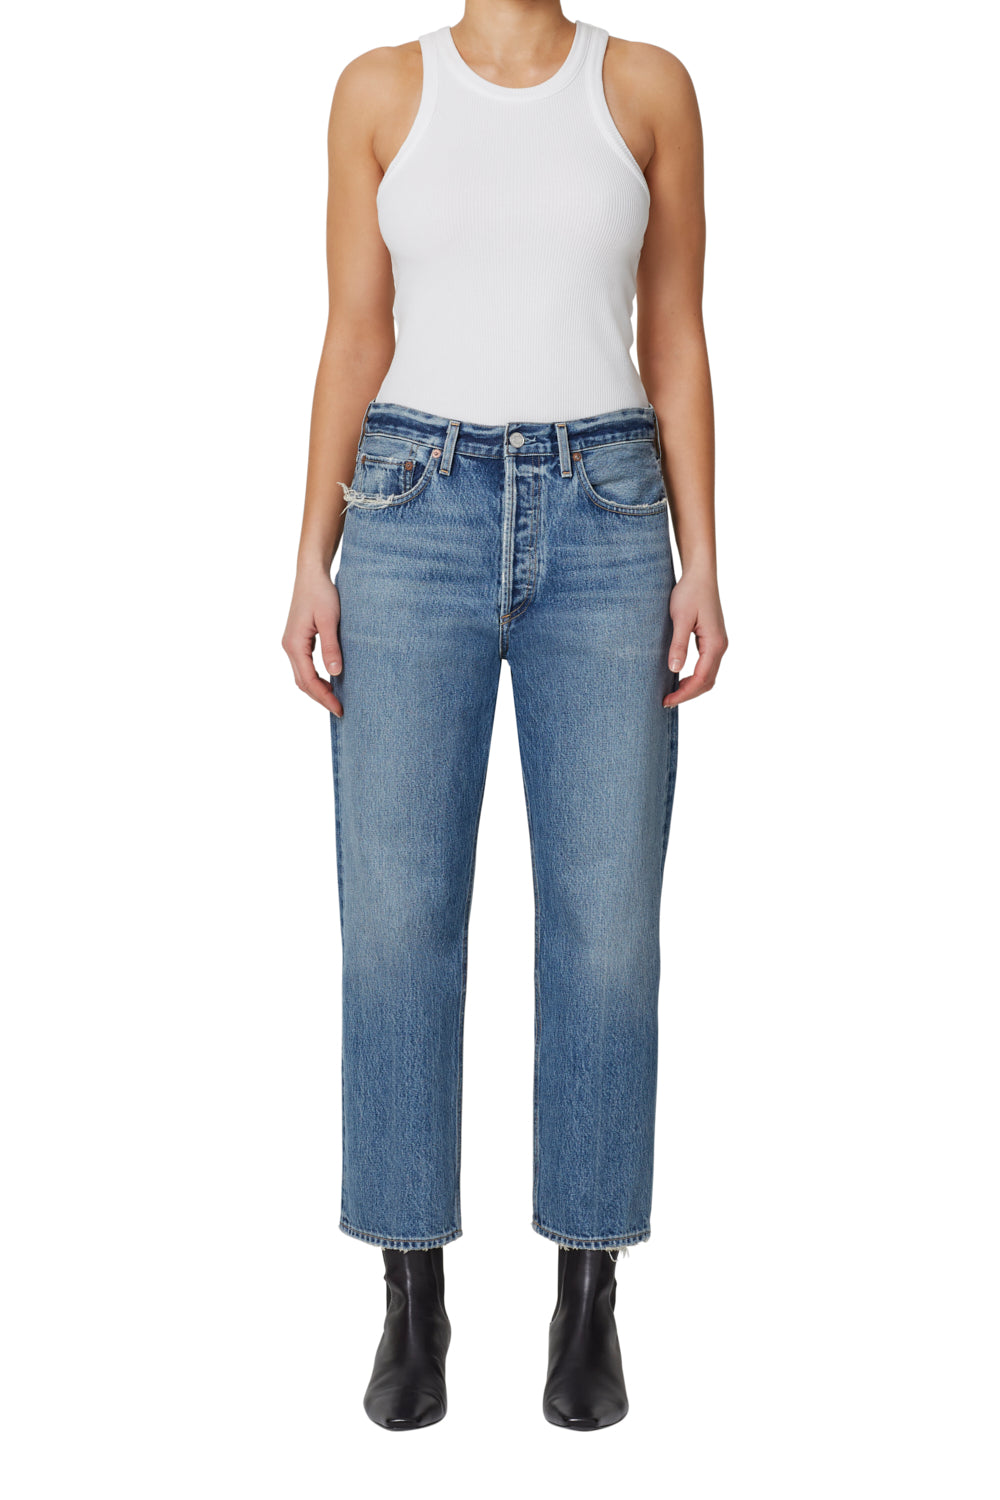 Agolde 90s Straight Crop Jean in Hooked